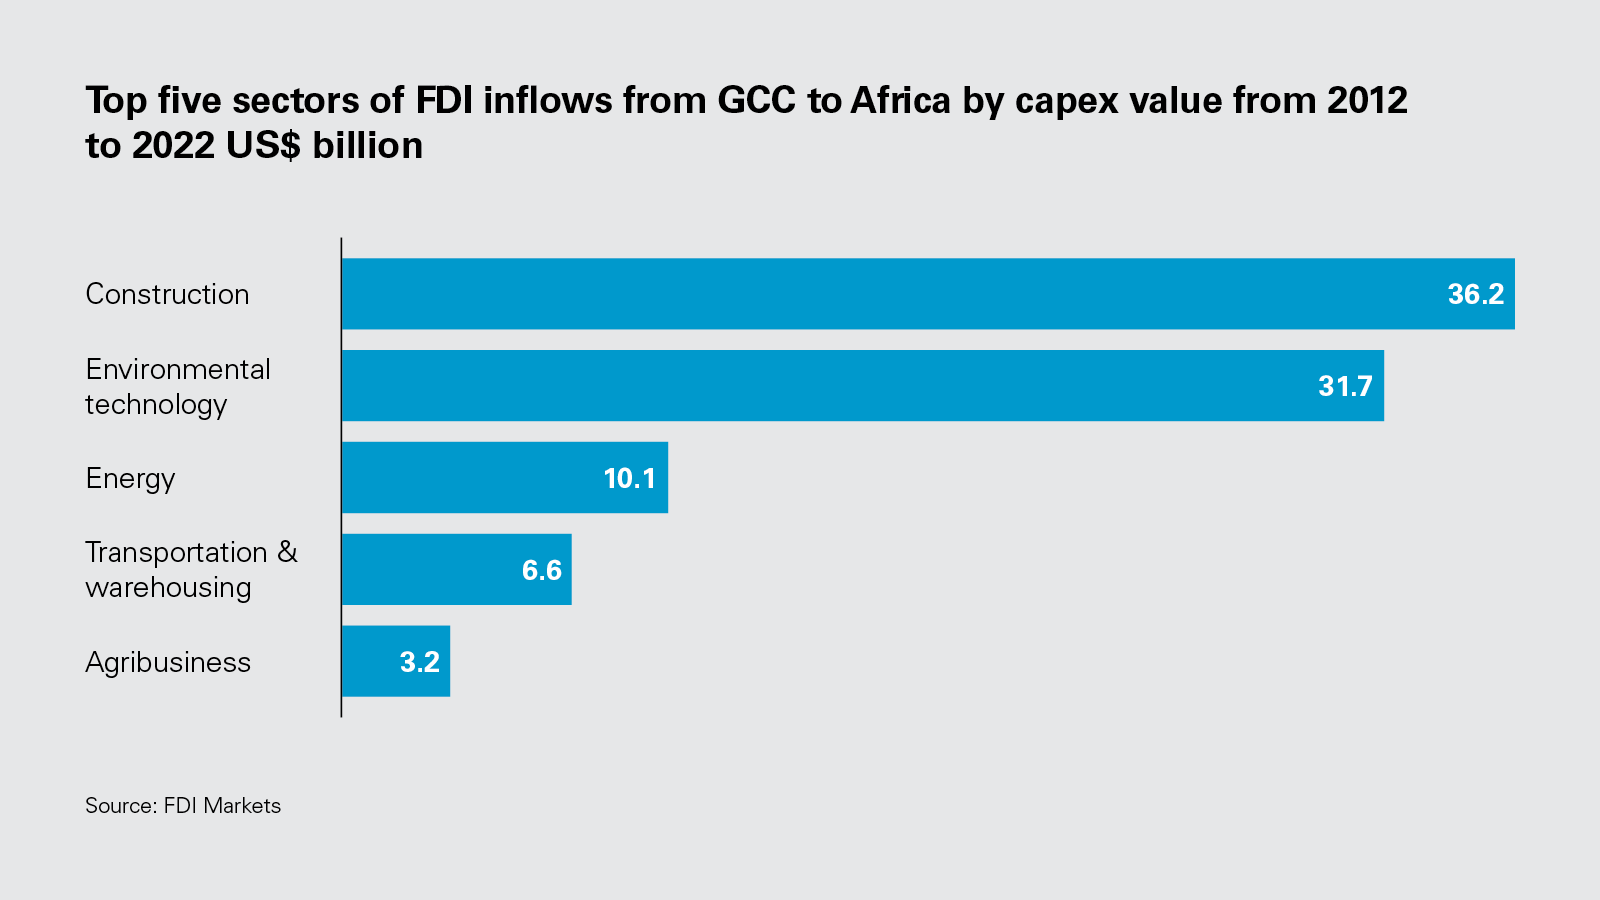 Top five sectors of FDI inflows from GCC to Africa by capex value from 2012 to 2022 US$ billion